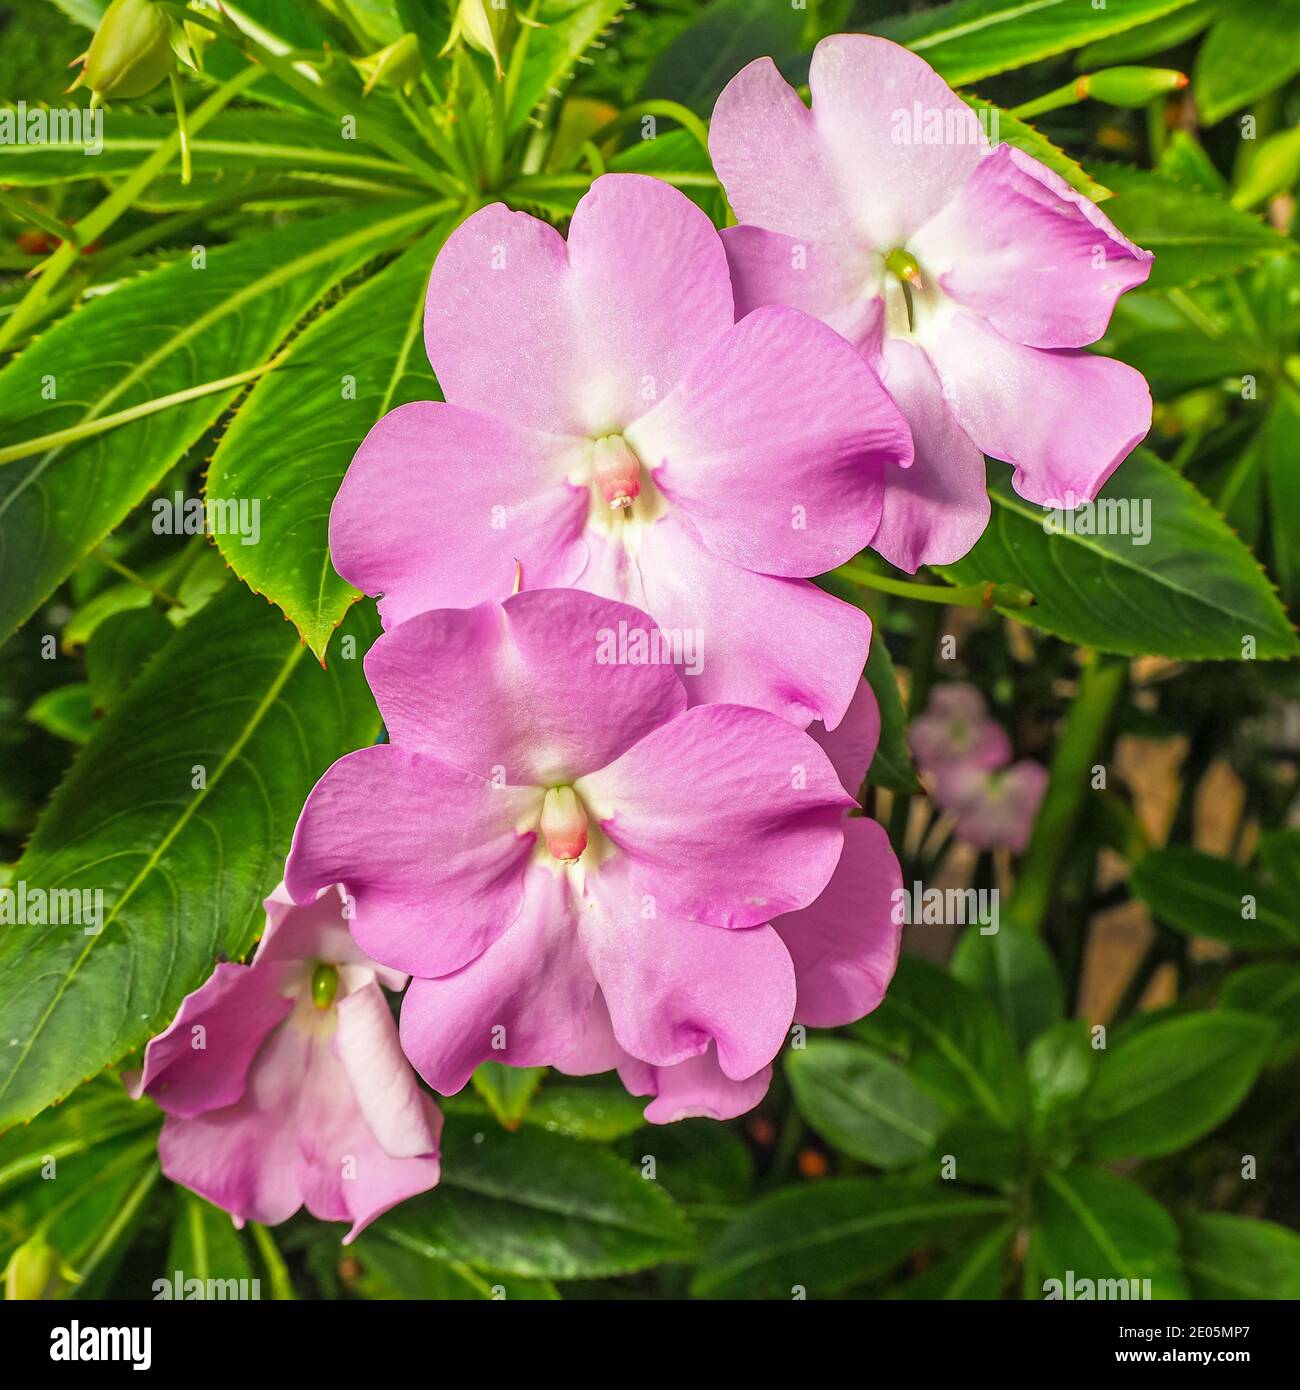 Delicate pink flowers and green leaves on an Impatiens plant Stock Photo